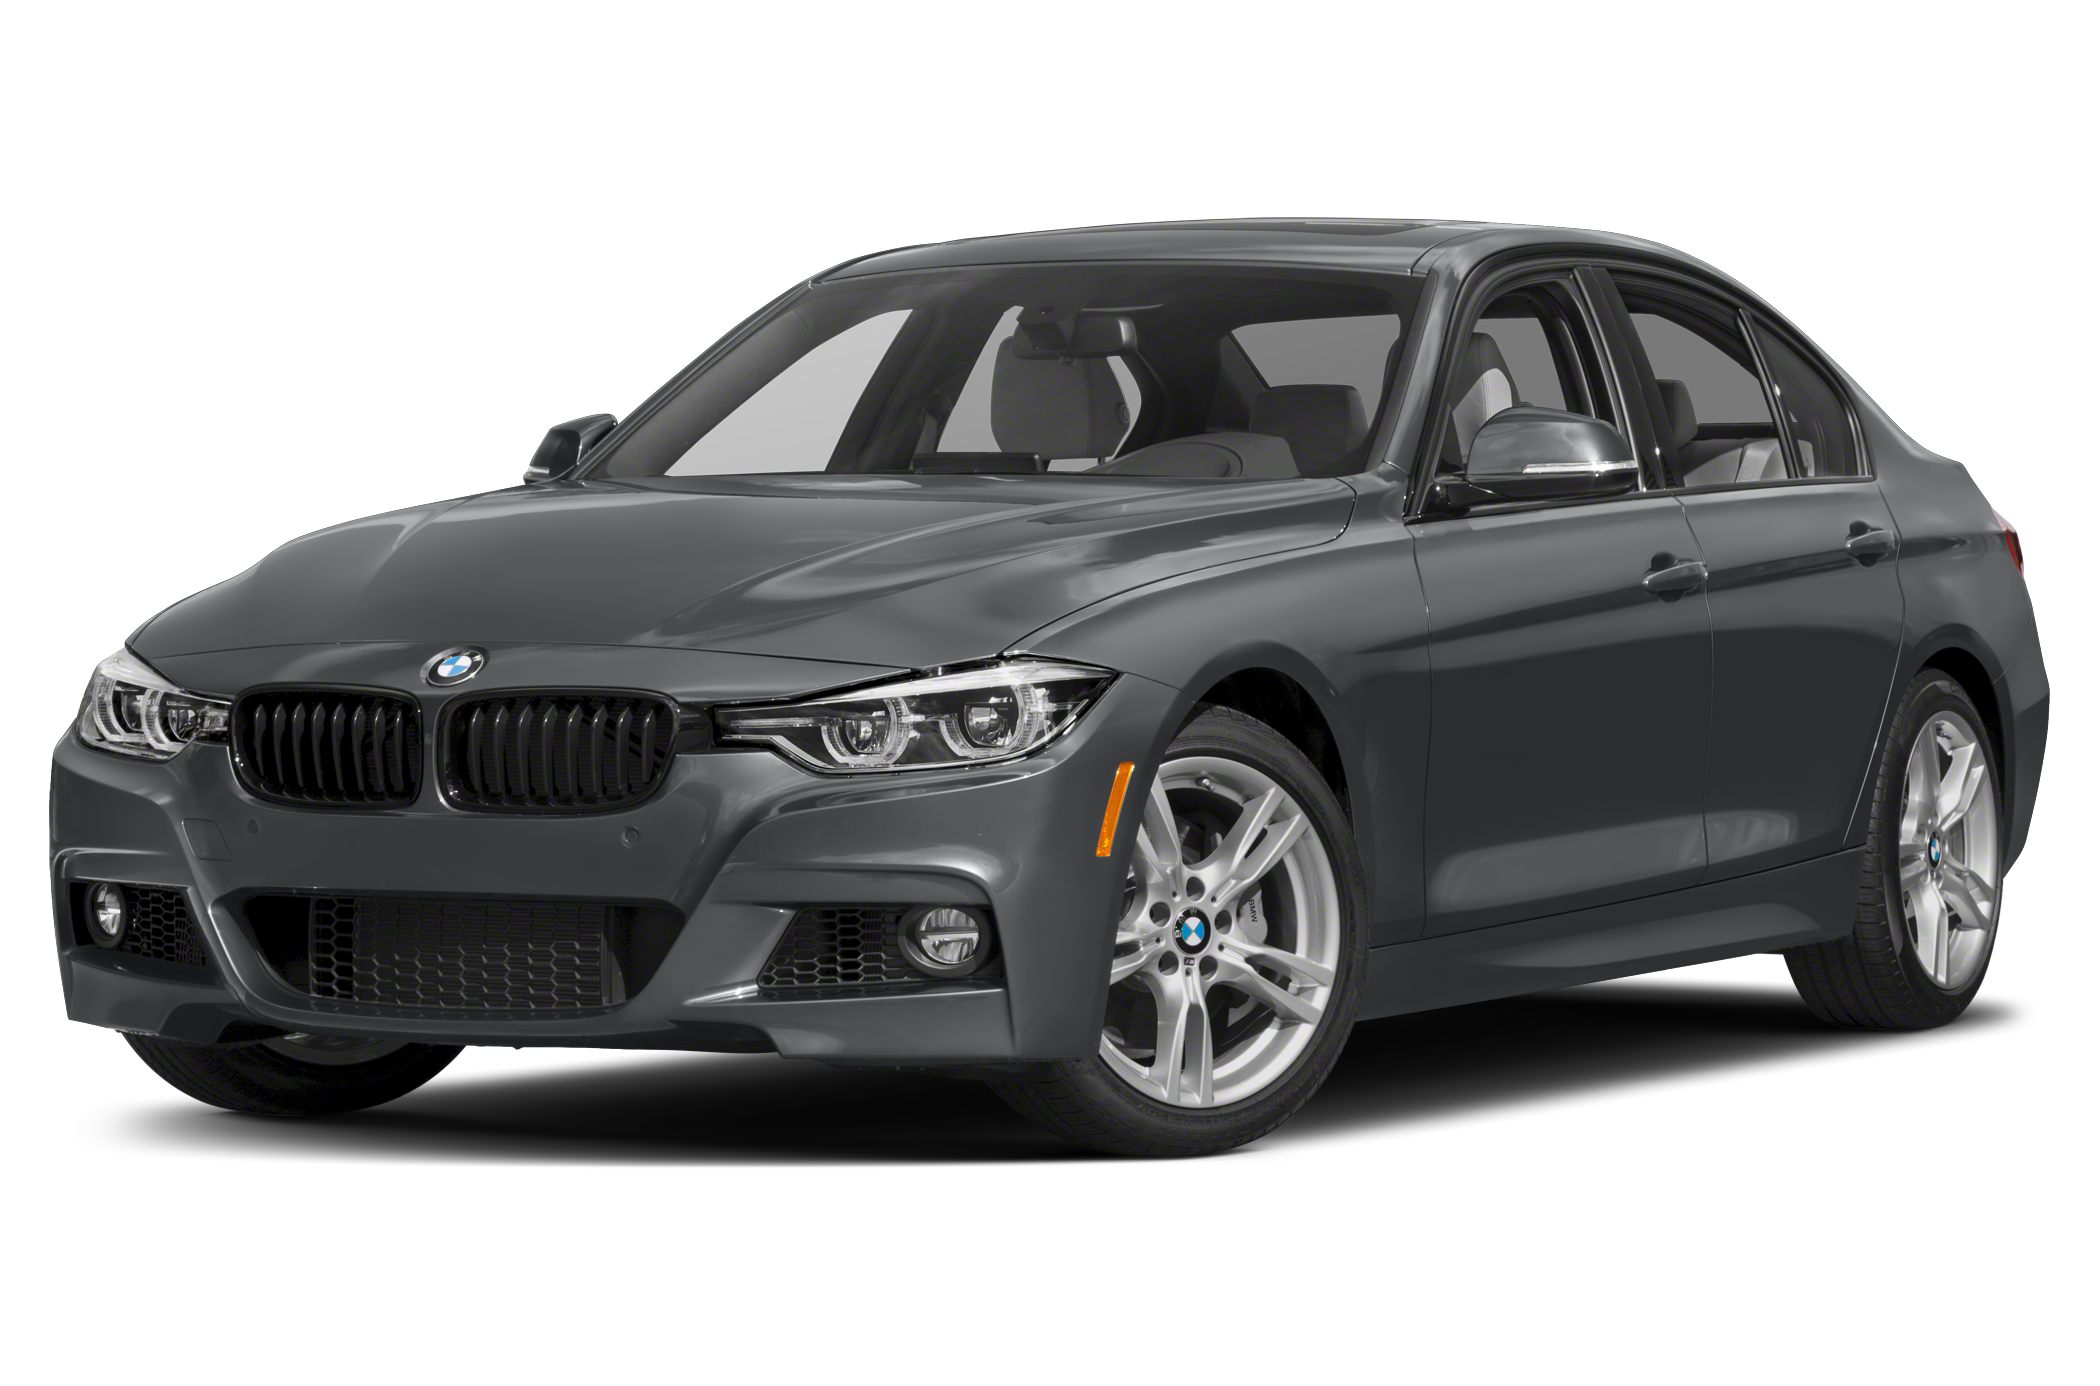  BMW 340I-Xdrive oem parts and accessories on sale